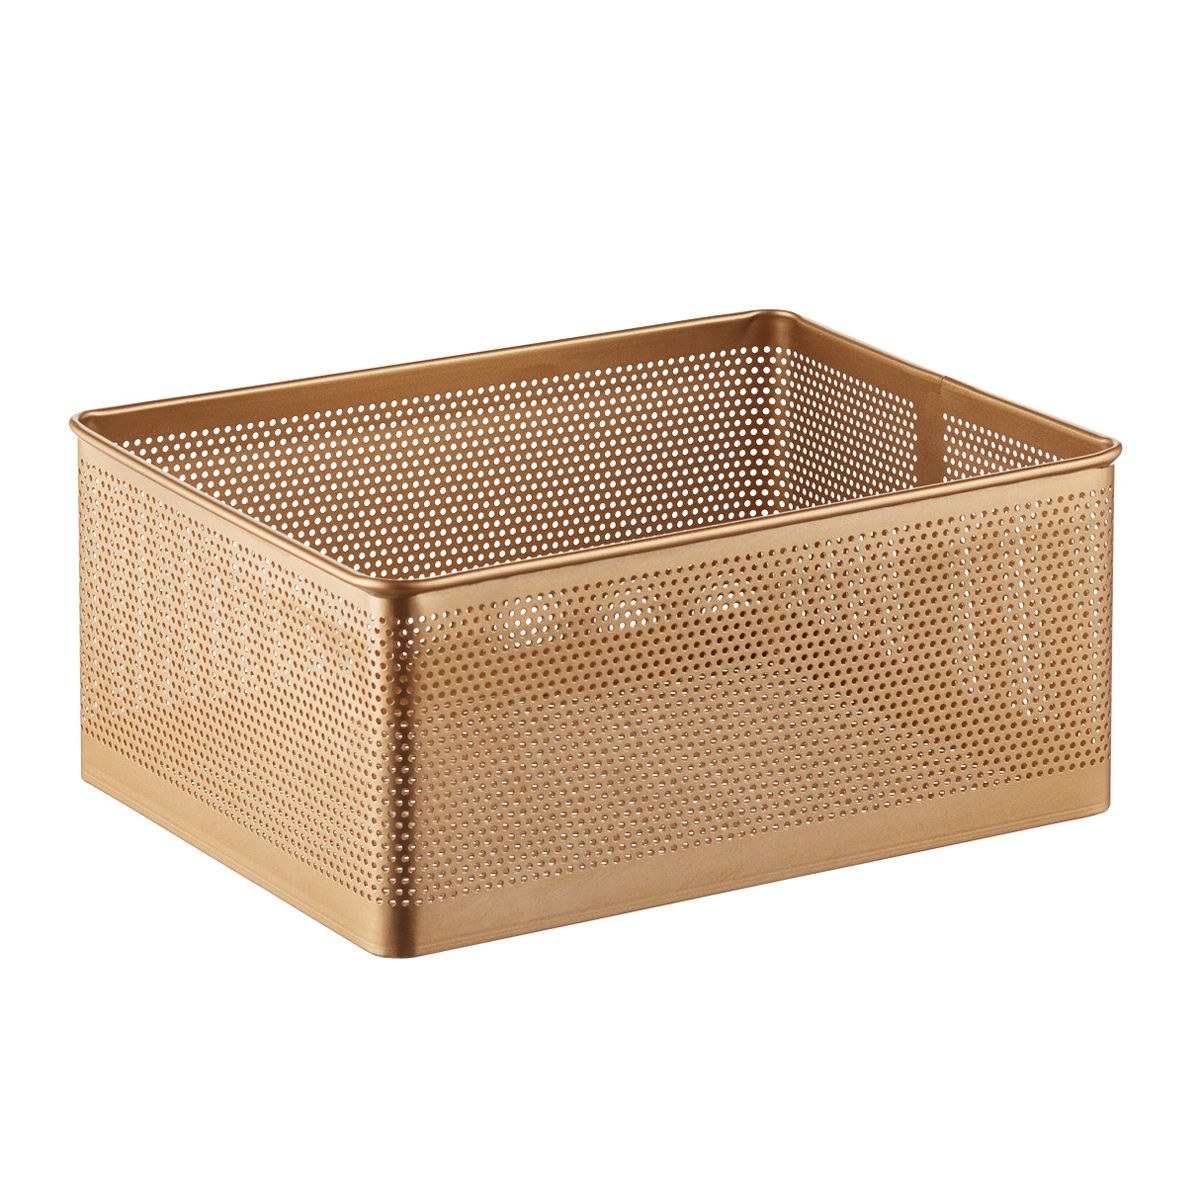 Serena Stamped Metal Bins | The Container Store